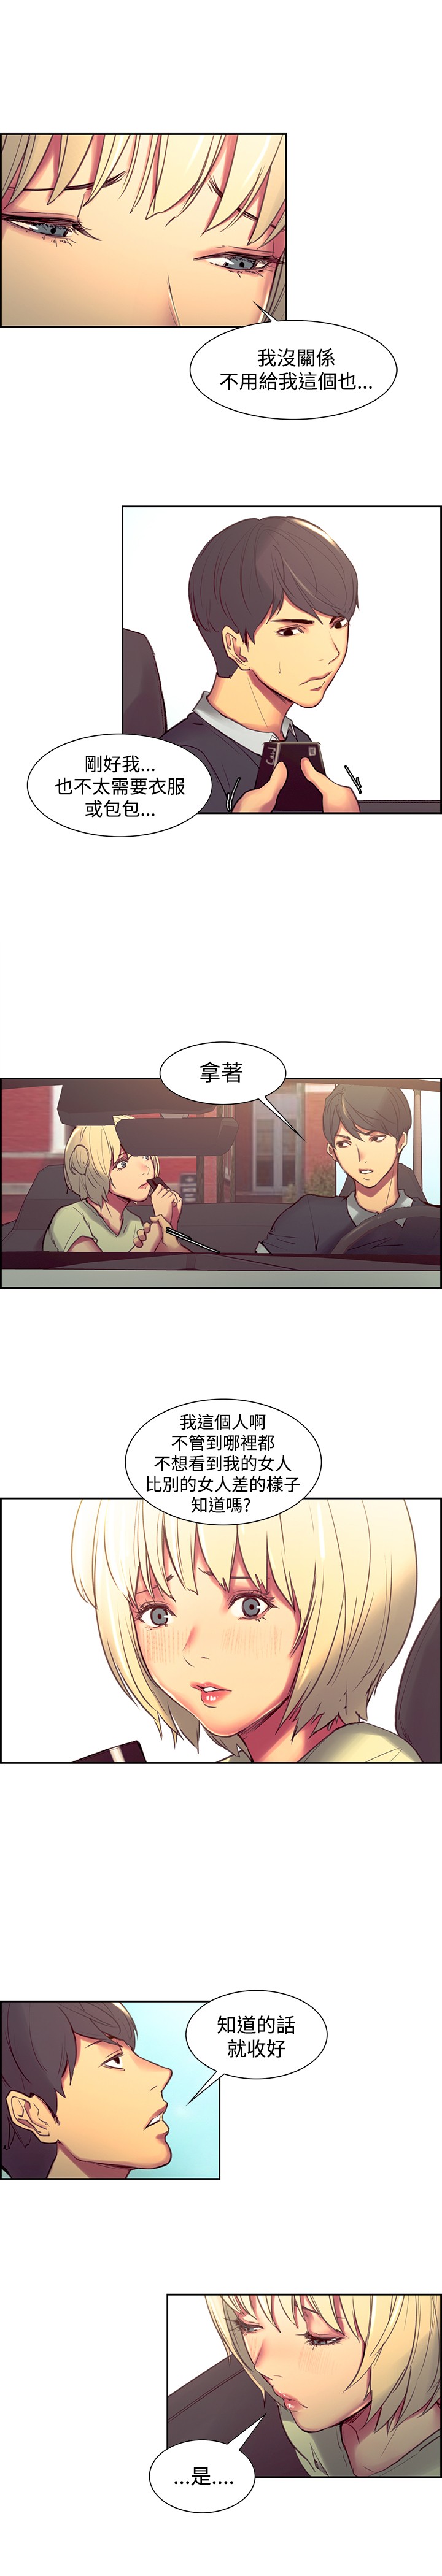 [Serious] Domesticate the Housekeeper 调教家政妇 Ch.29~41 [Chinese]中文 page 29 full